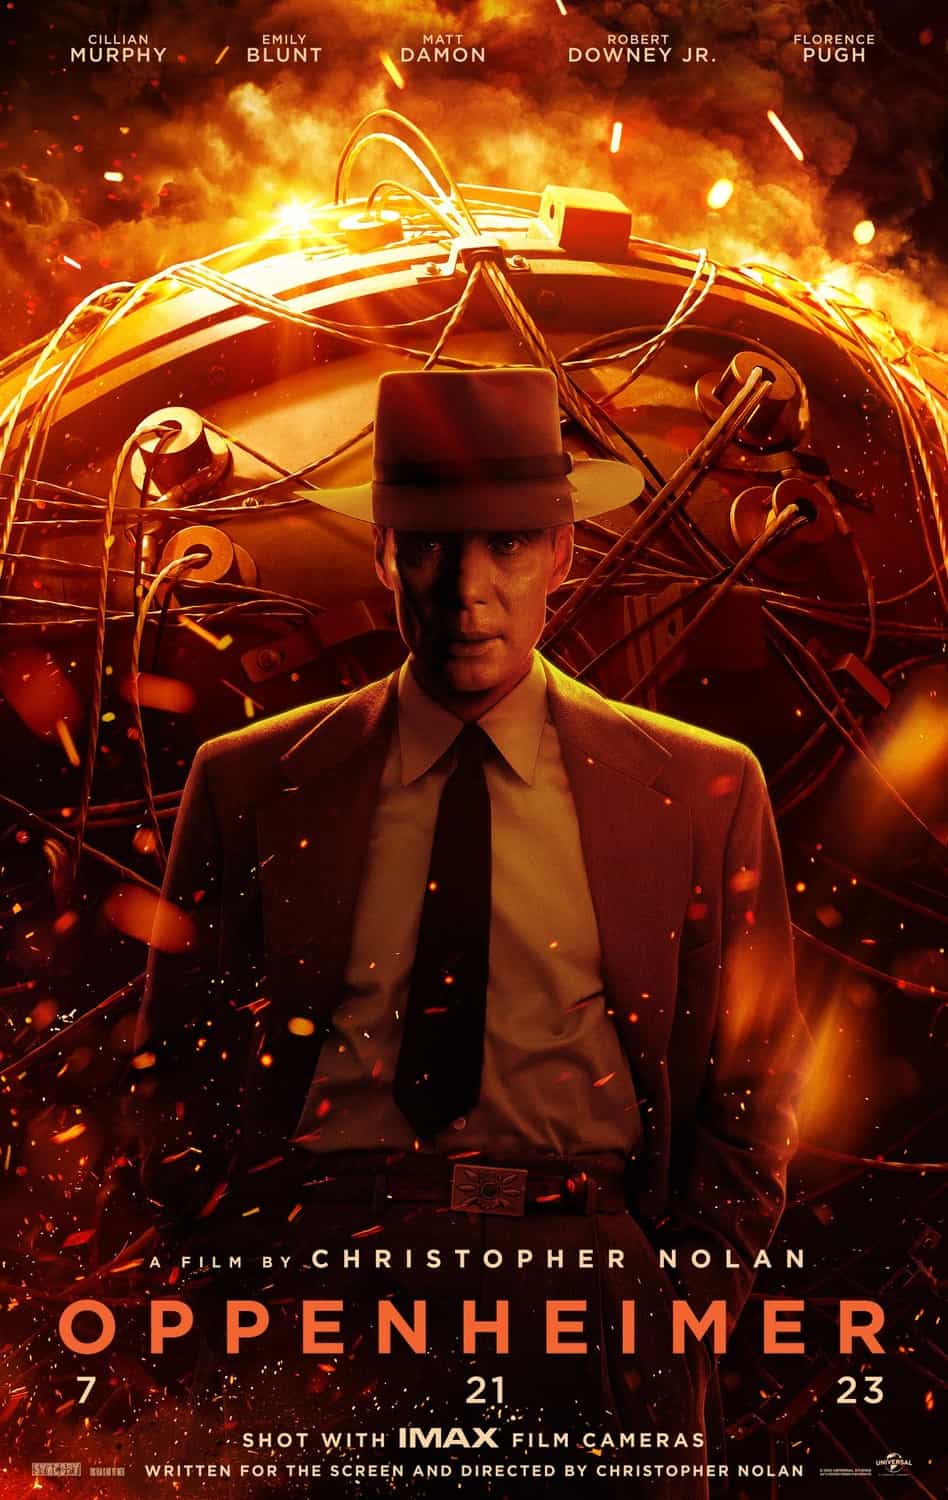 Check out the new trailer and poster for upcoming movie Oppenheimer which stars Florence Pugh and Cillian Murphy - movie UK release date 21st July 2023 #oppenheimer